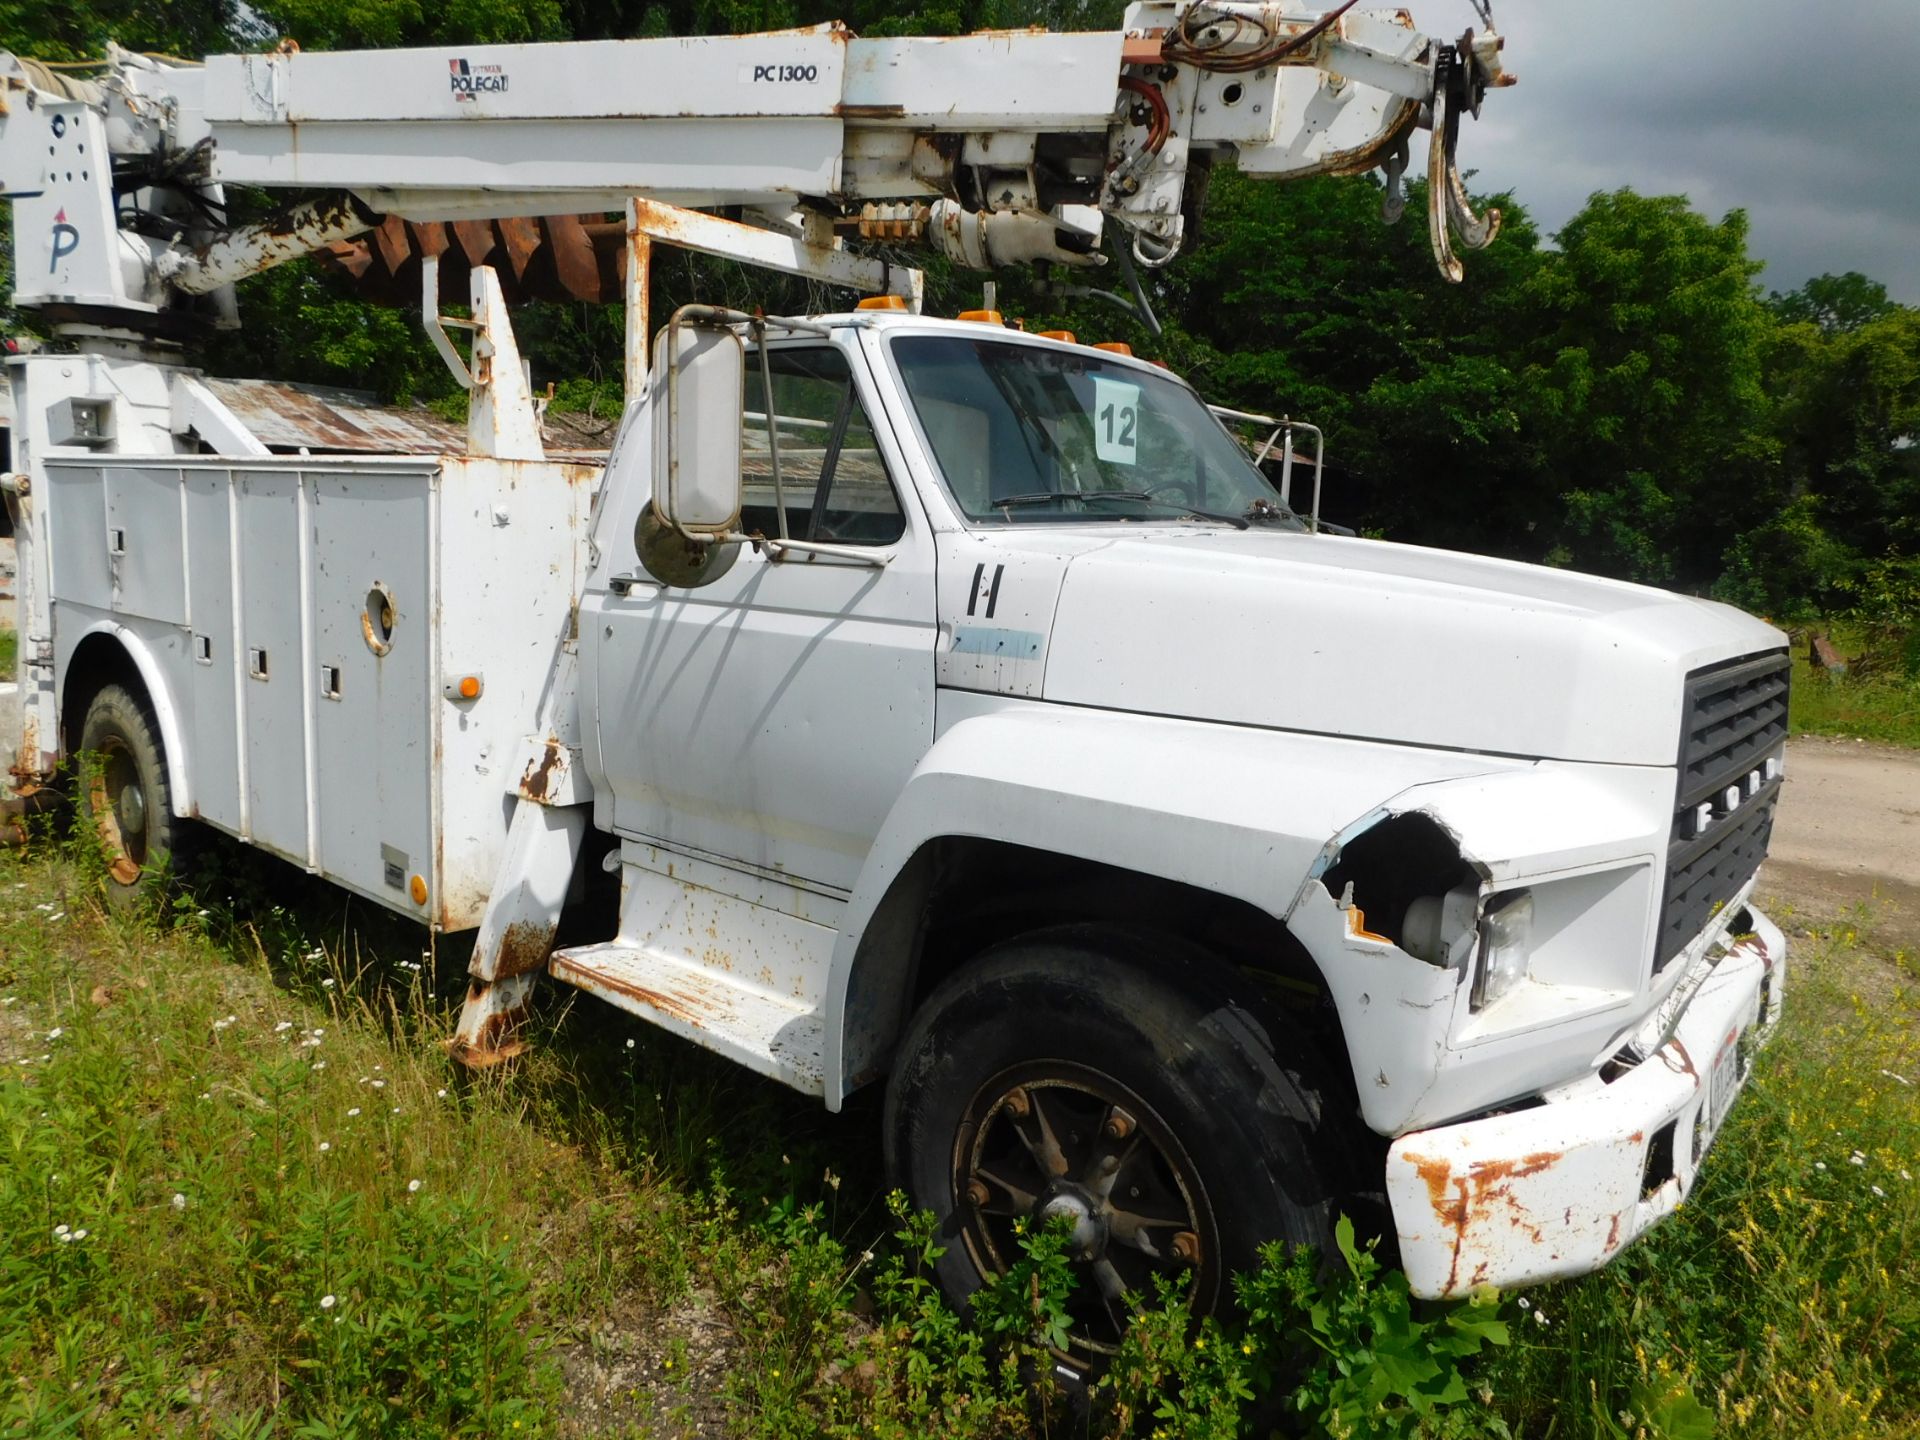 1985 Ford F700 Single Axle Auger/Pole Truck, VIN 1FDPF70H9FVA07189, Gas, 5-Speed Manual - Image 4 of 30